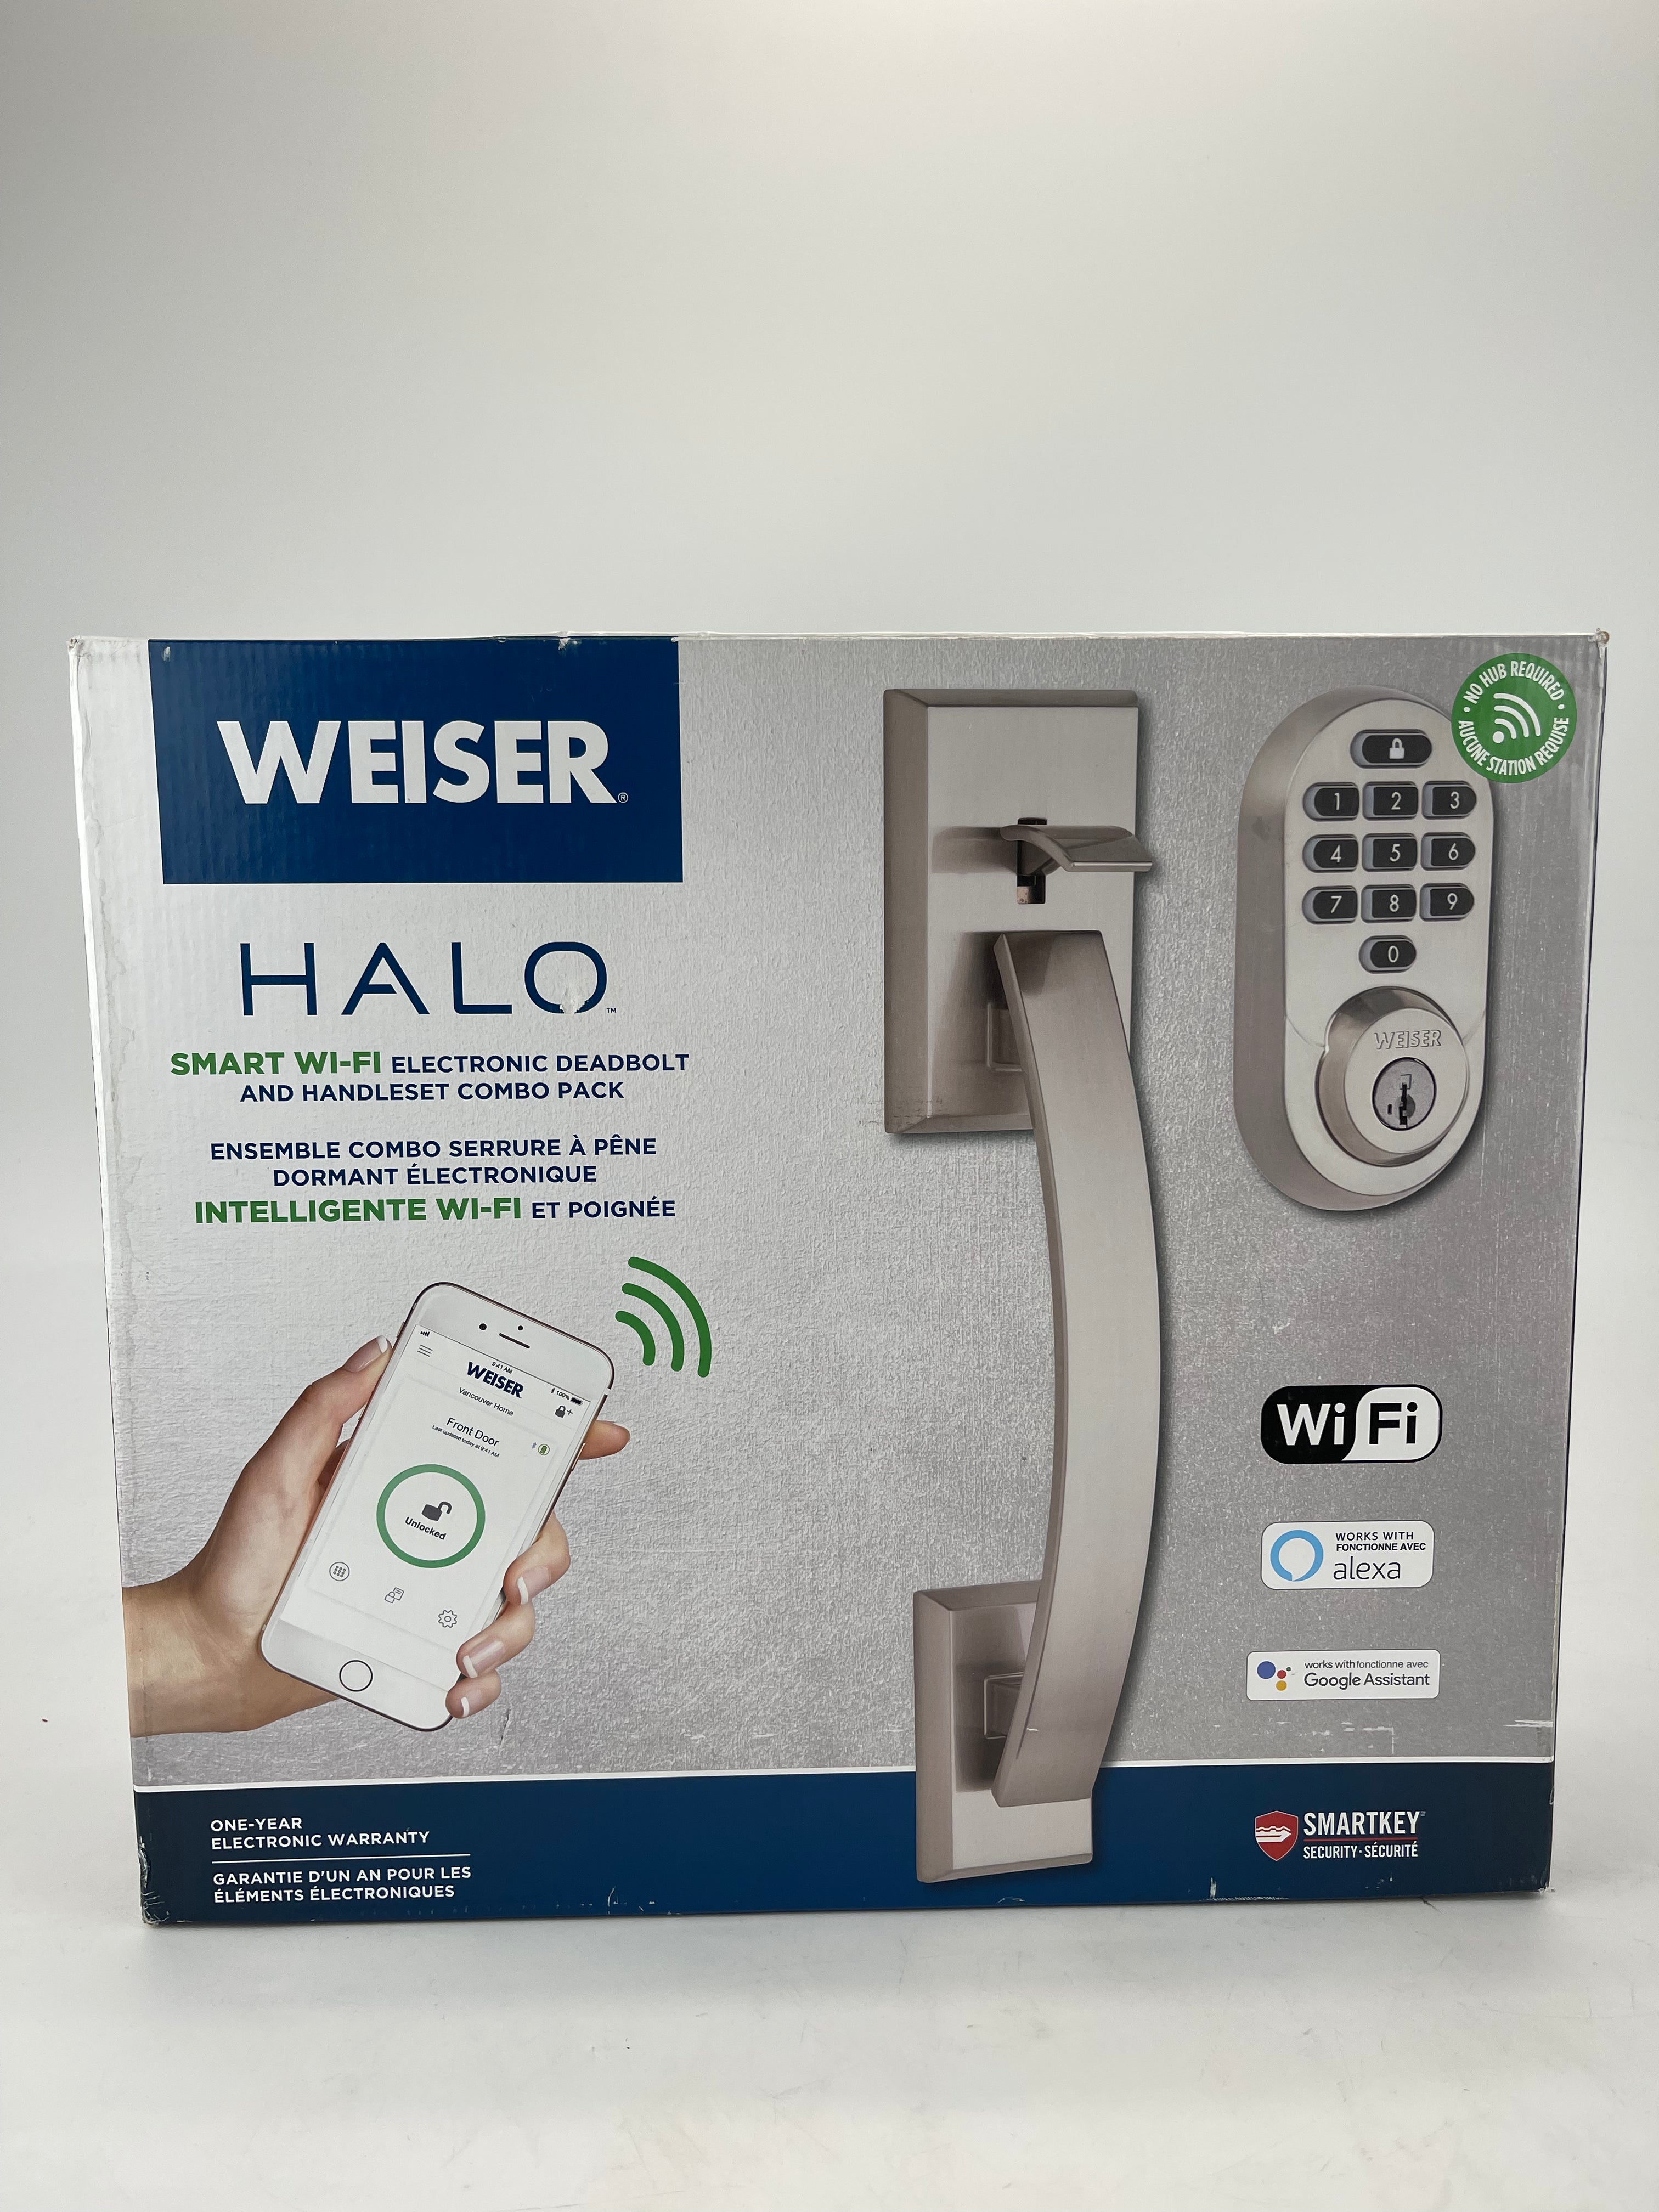 Weiser Halo Smart Wi-Fi Electronic Deadbolt and Handleset Combo Pack